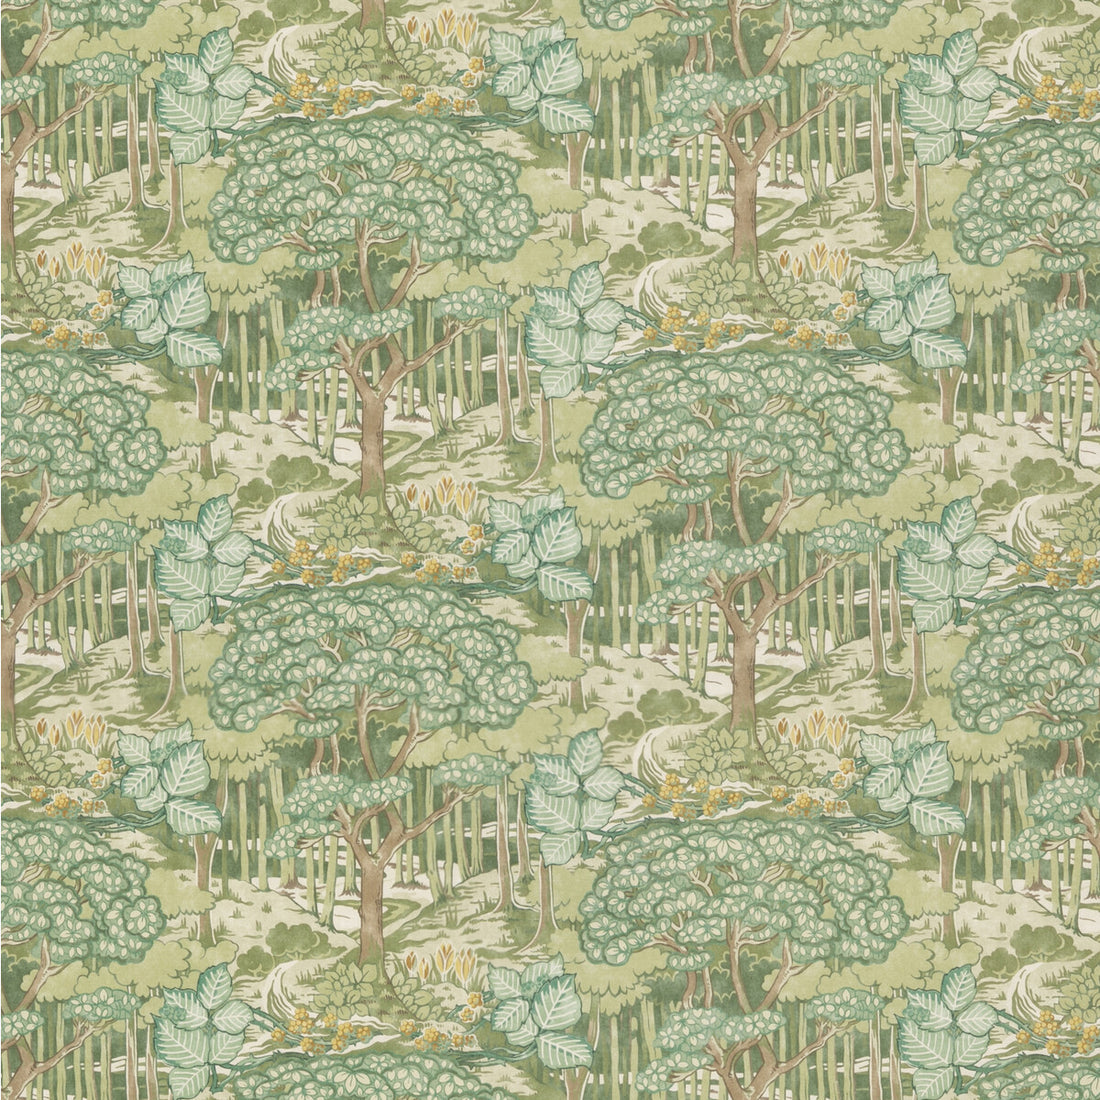 Ruskin Cotton fabric in green color - pattern BP10971.1.0 - by G P &amp; J Baker in the Original Brantwood Fabric collection